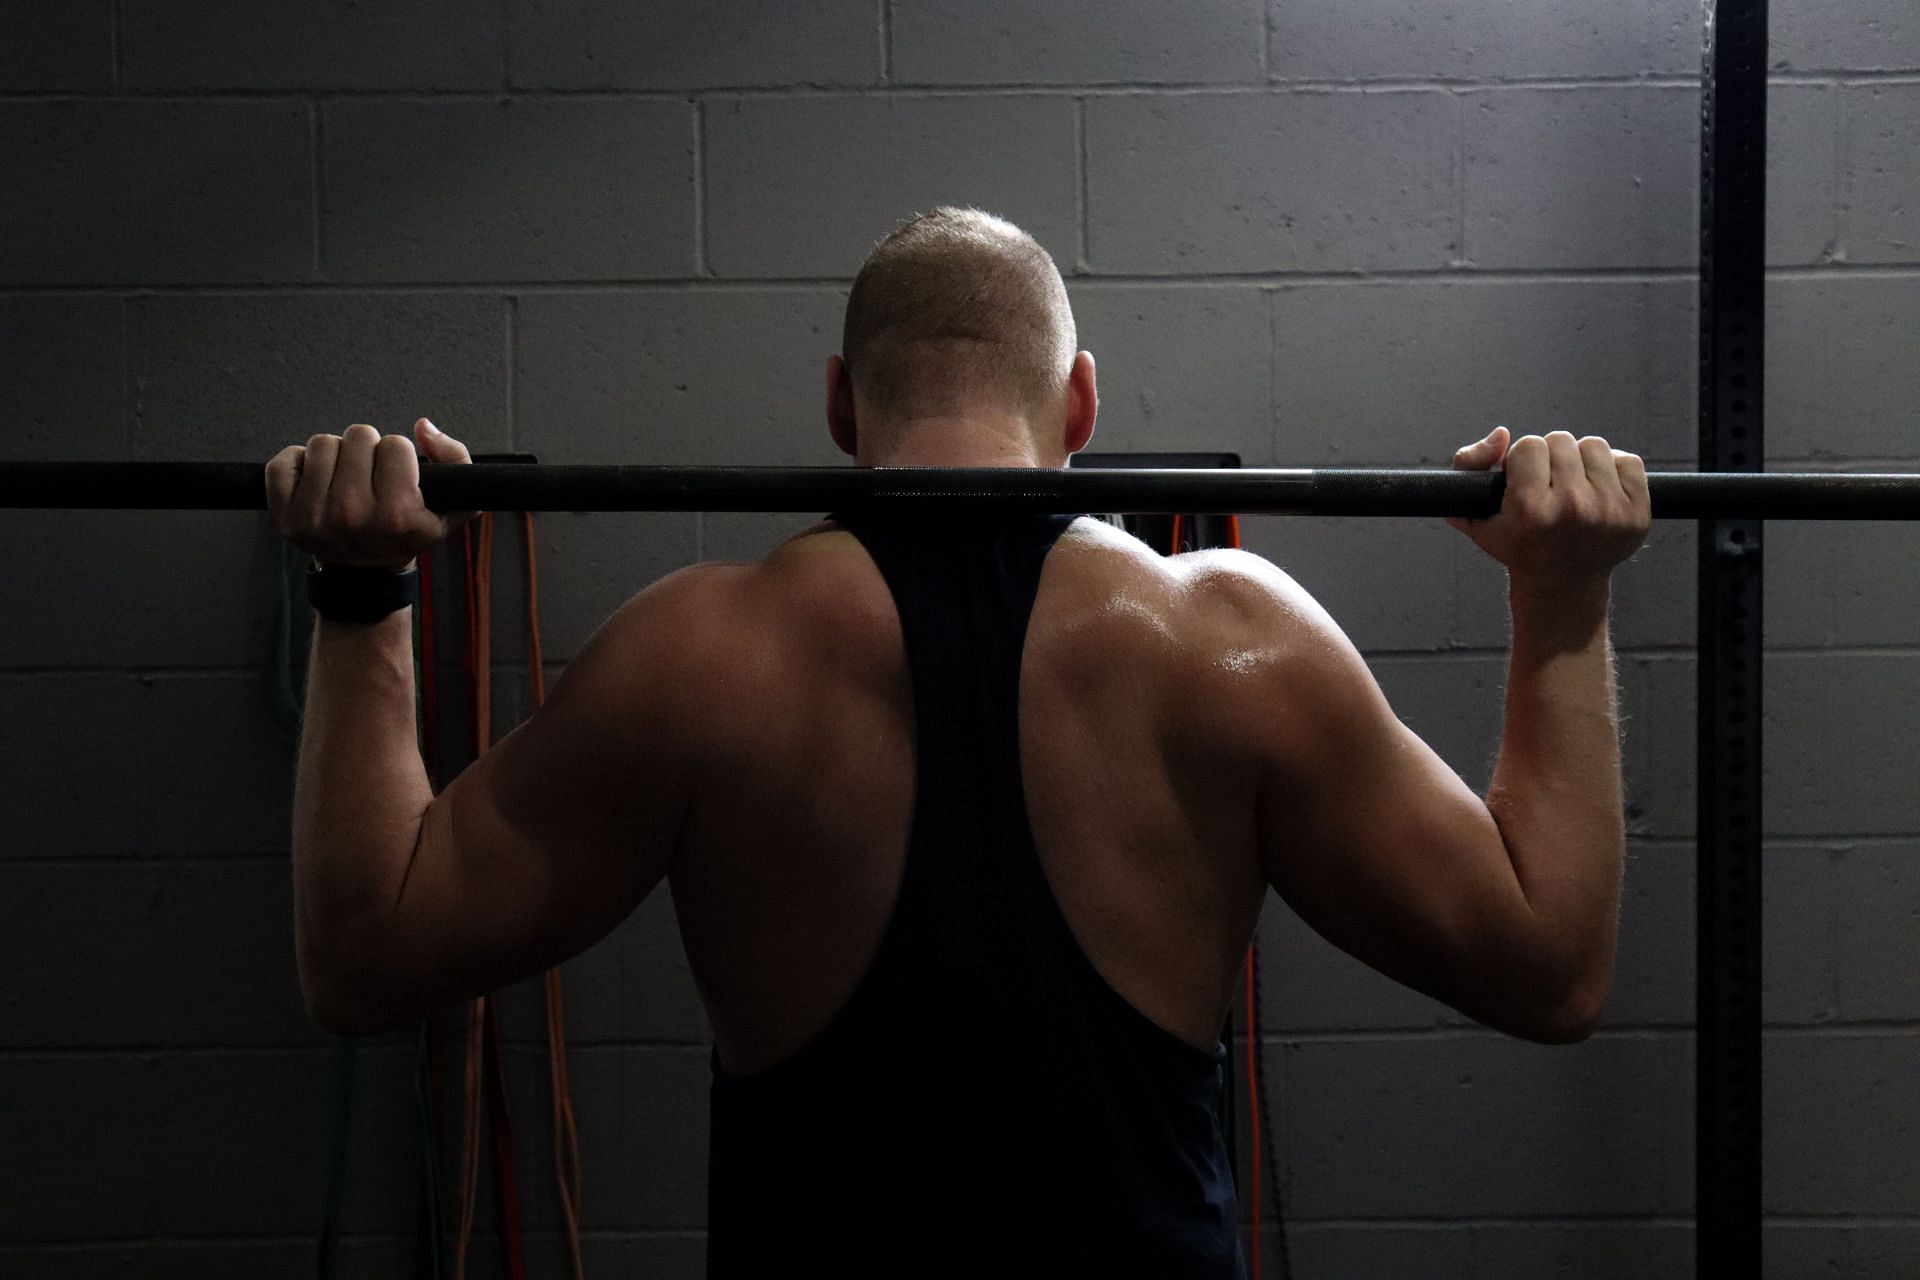 Dumbbell workout stimulates and enhances shoulder muscle growth. (Image via Unsplash / Morrow Solutions)